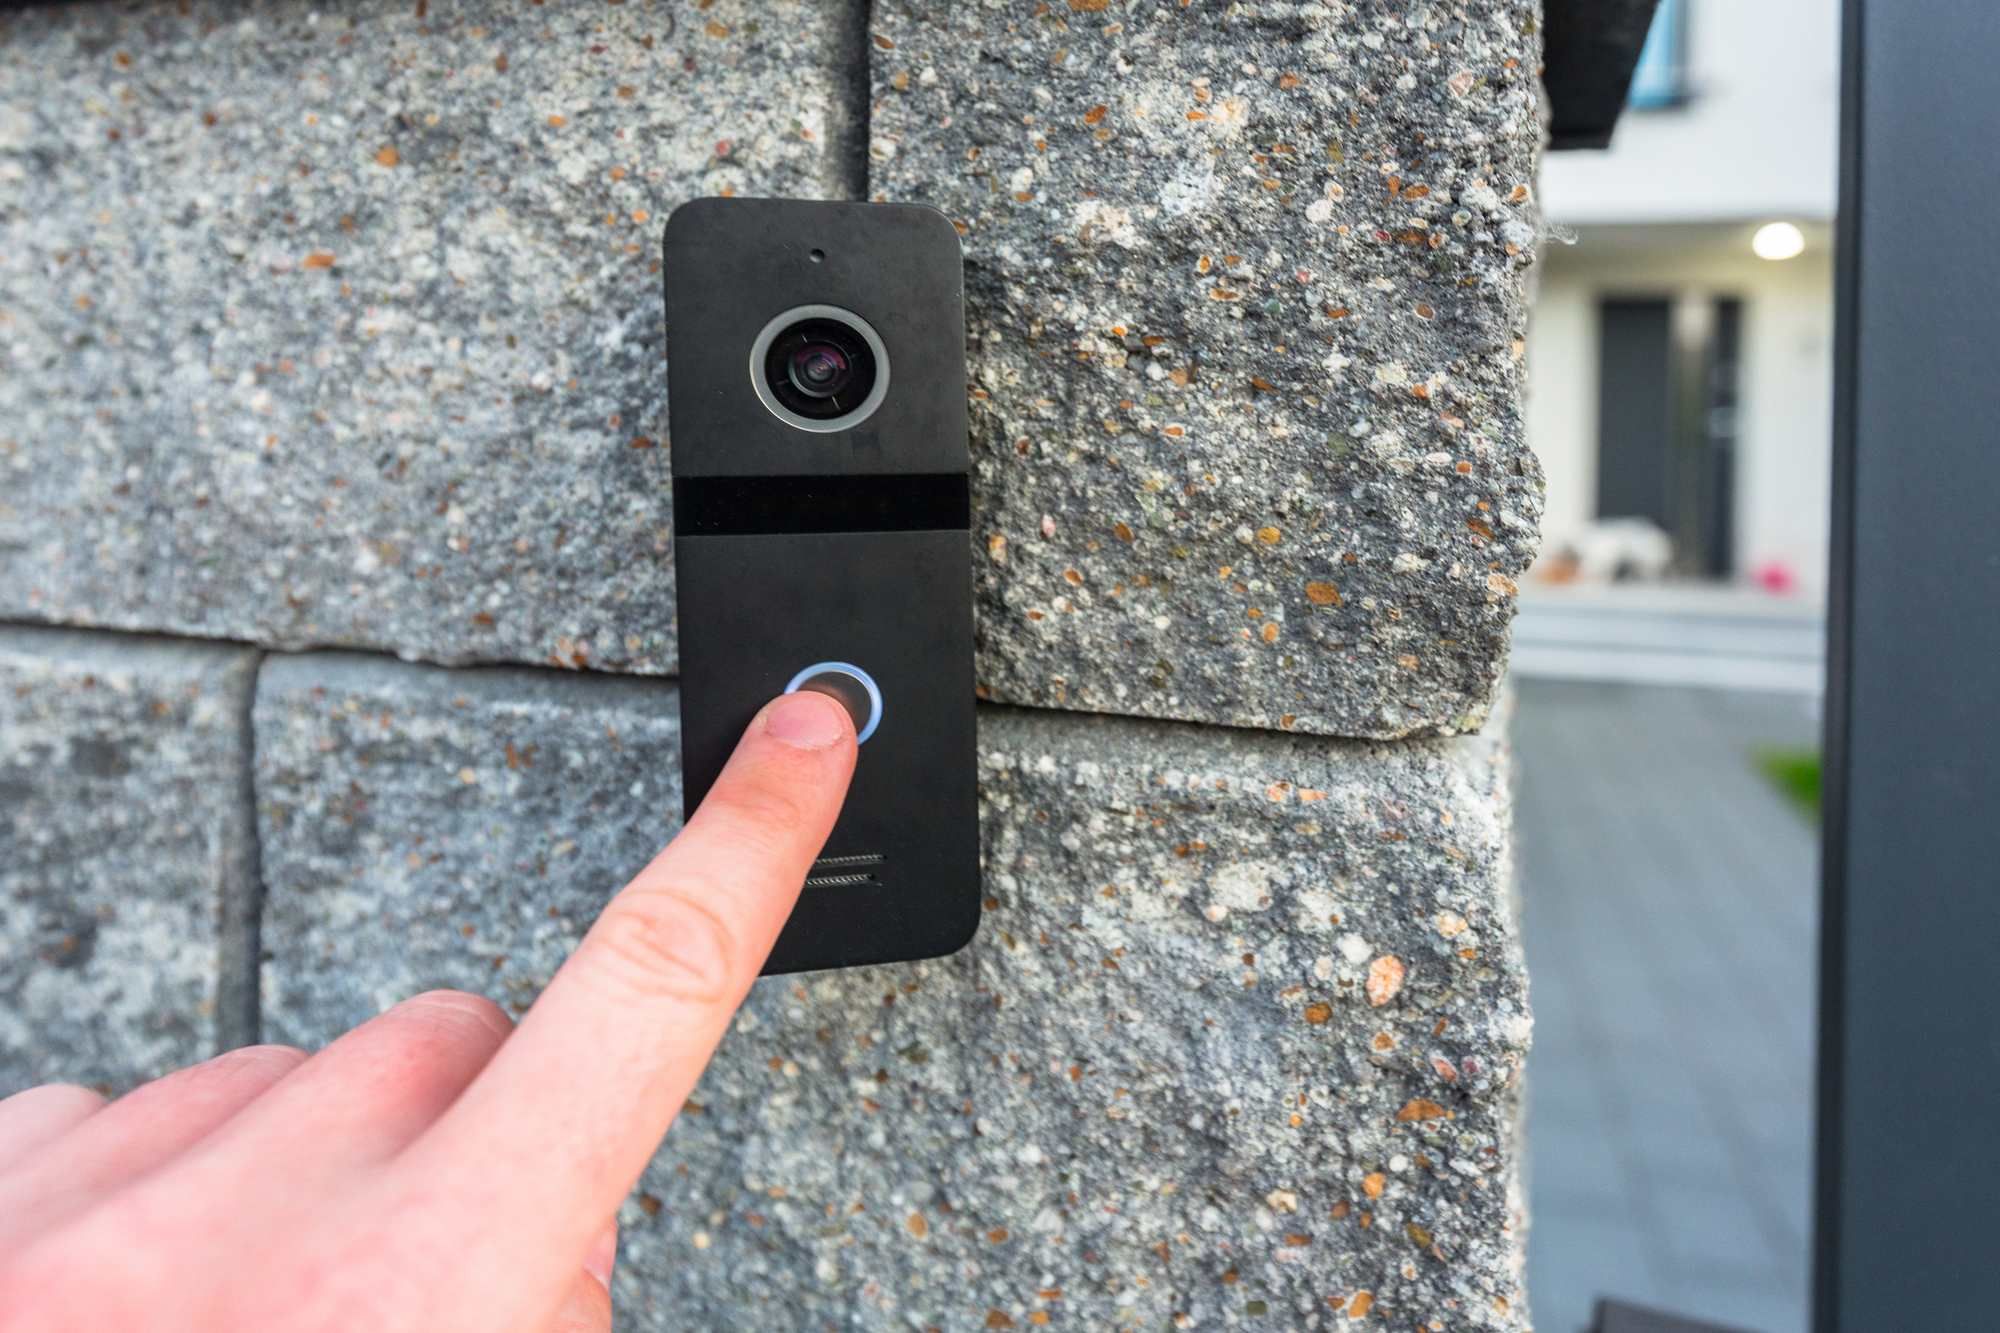 Ring doorbell privacy class action lawsuit has been filed over hackers.